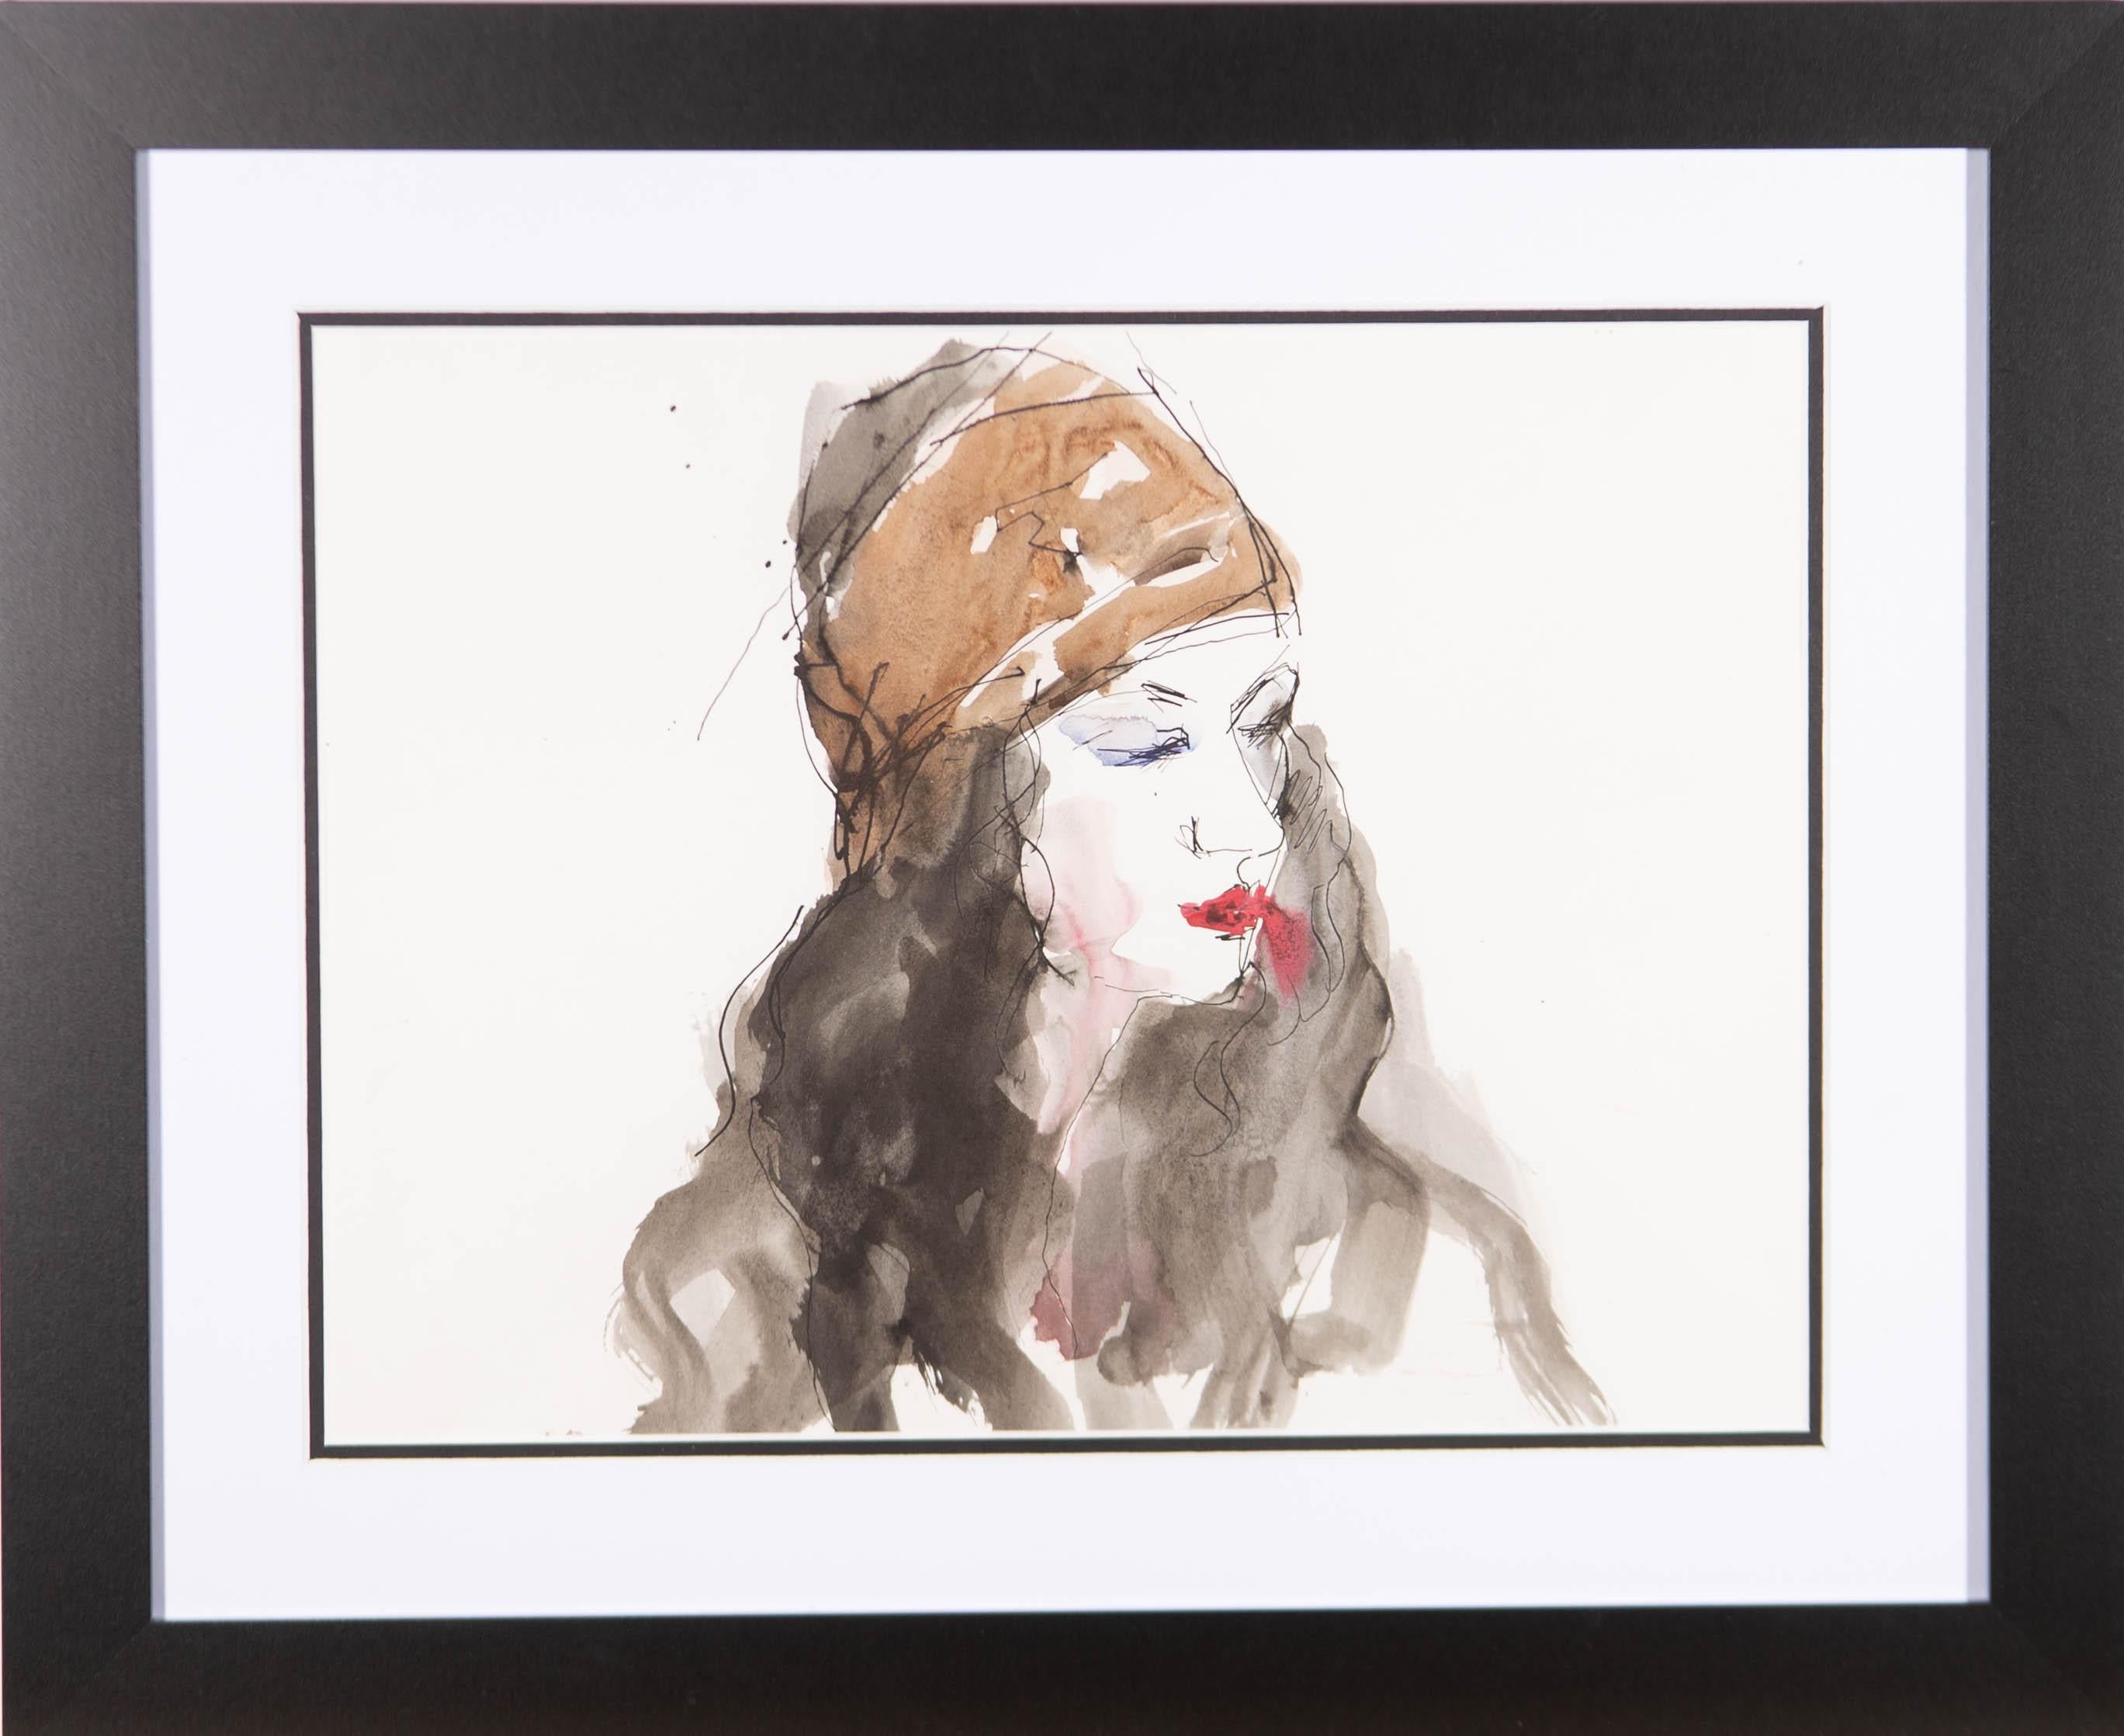 A wonderful watercolour with pen and ink portrait of a young woman by the listed British artist Peter Collins. Here, the artist has beautifully captured the sitter's essence in loose brush strokes and rough outlines. Unsigned. Well-presented in a